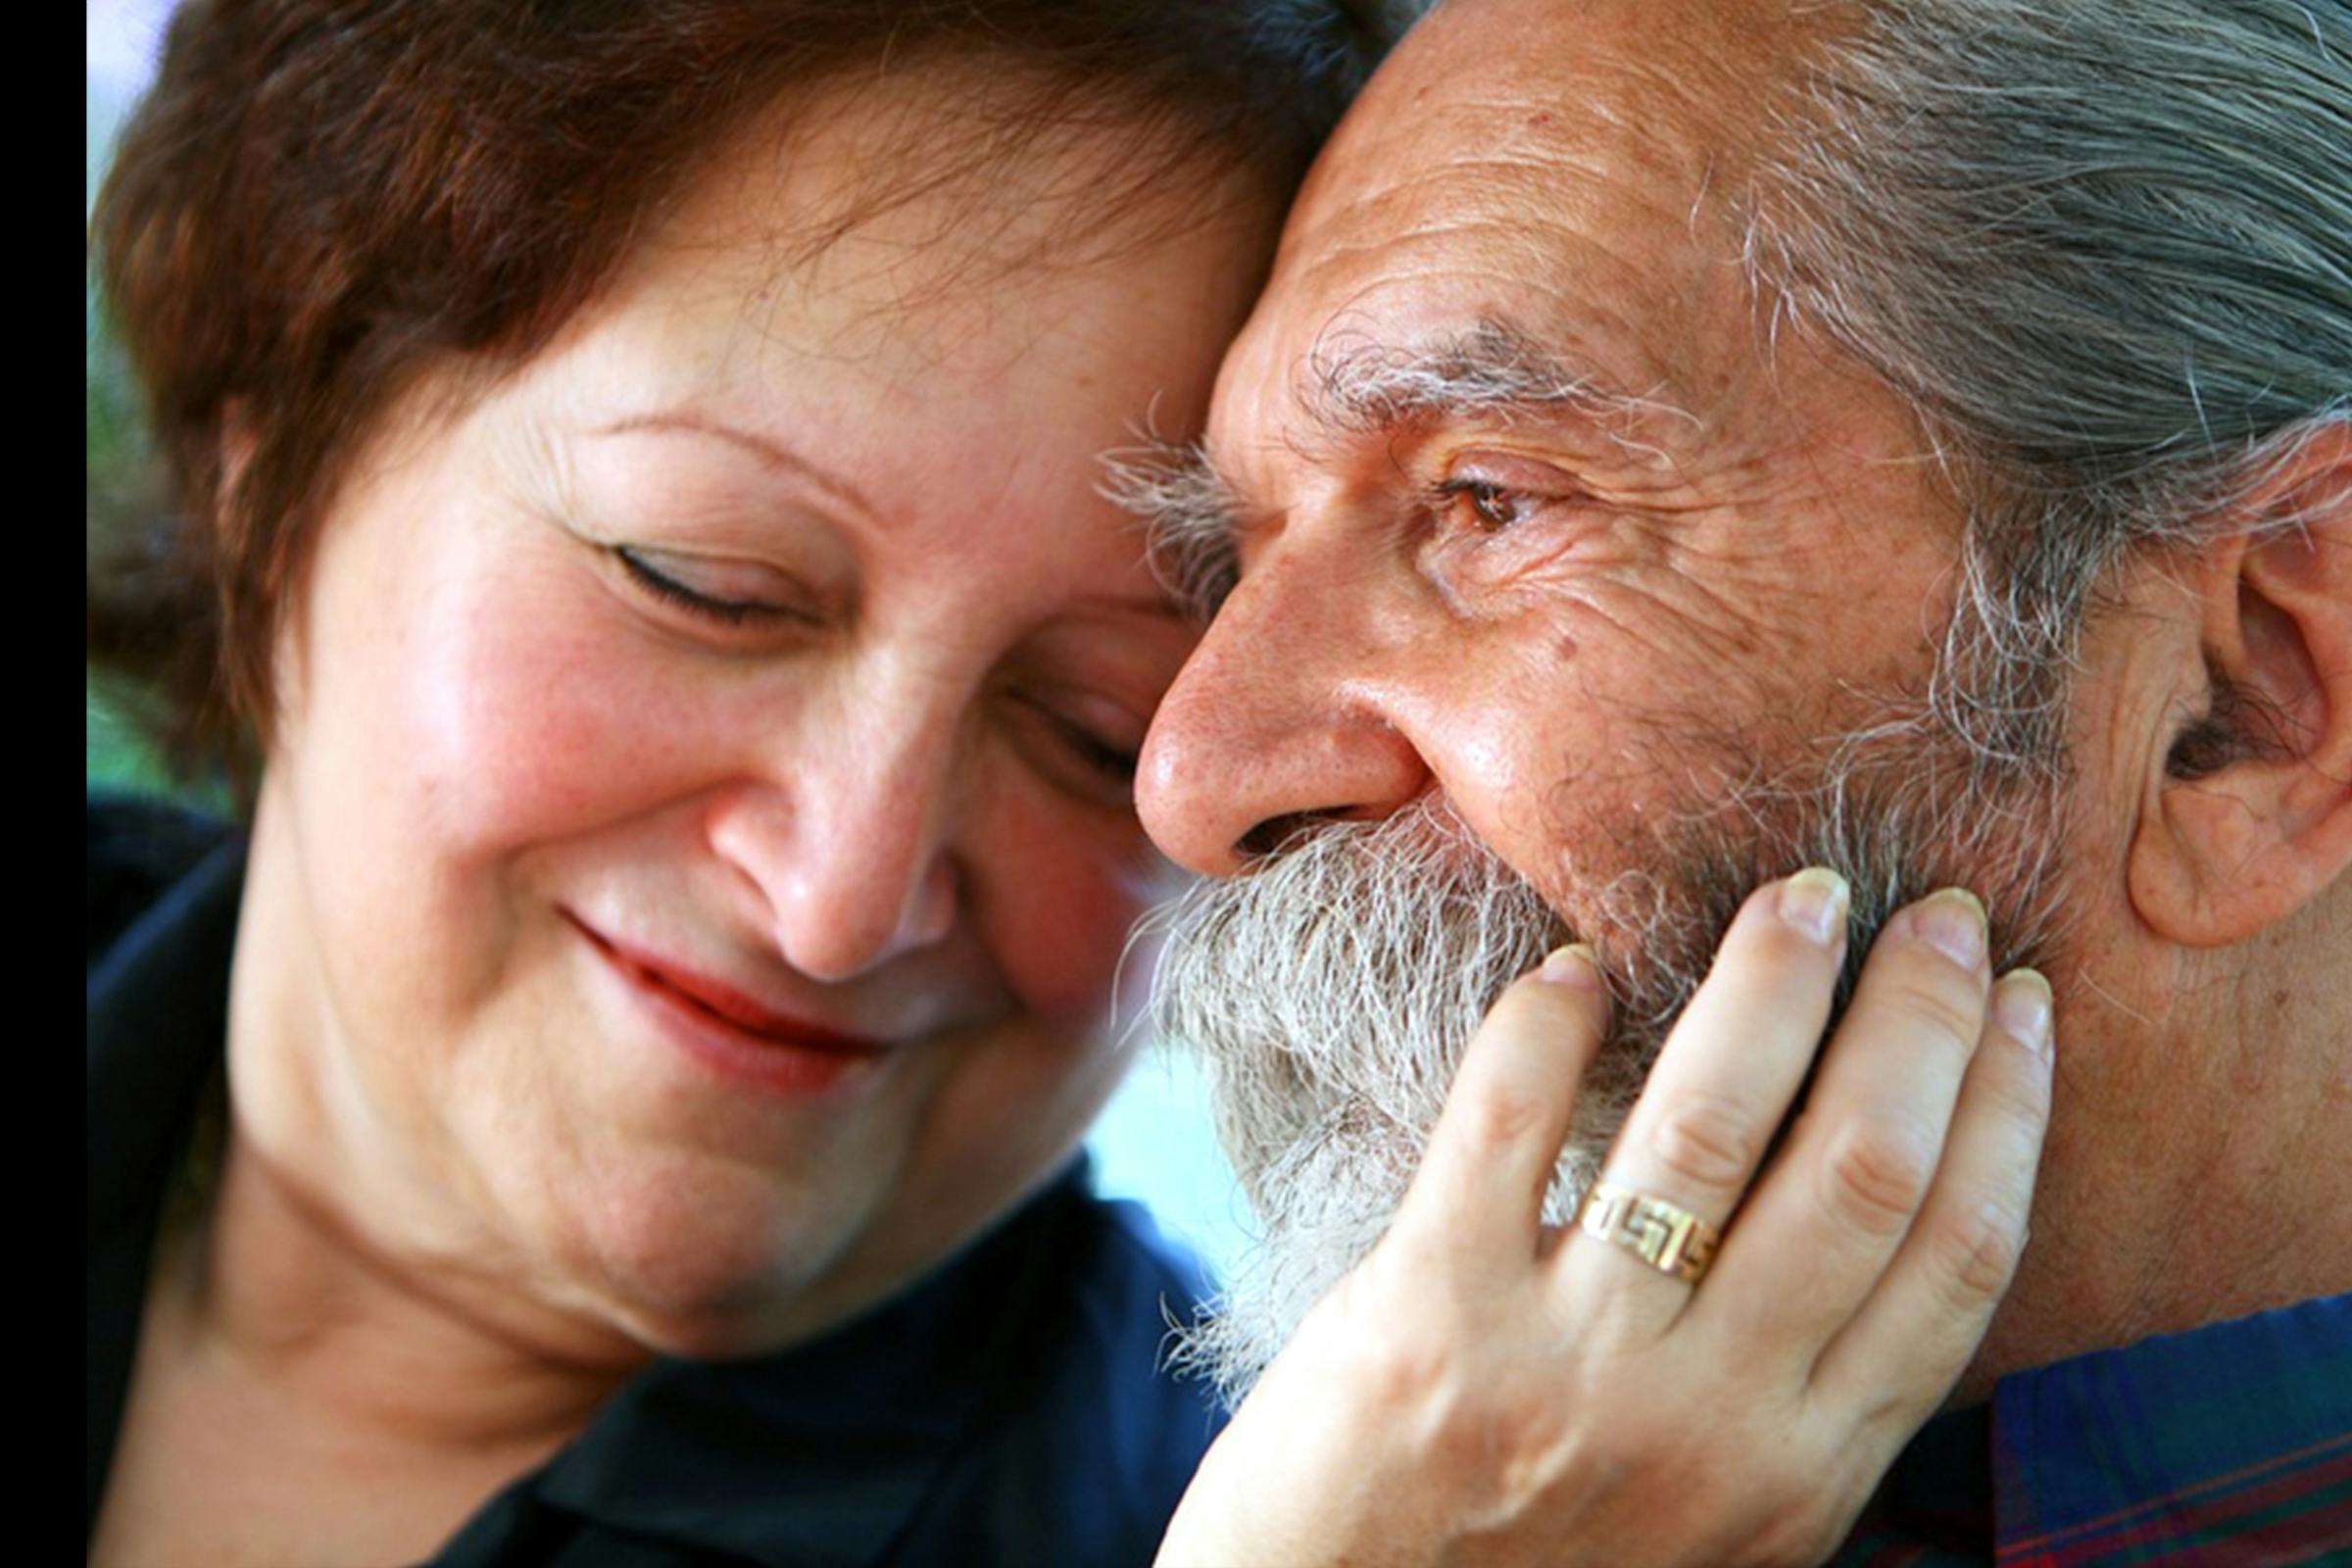 Older couple, the woman's hand rests on the cheek of the man, both look content